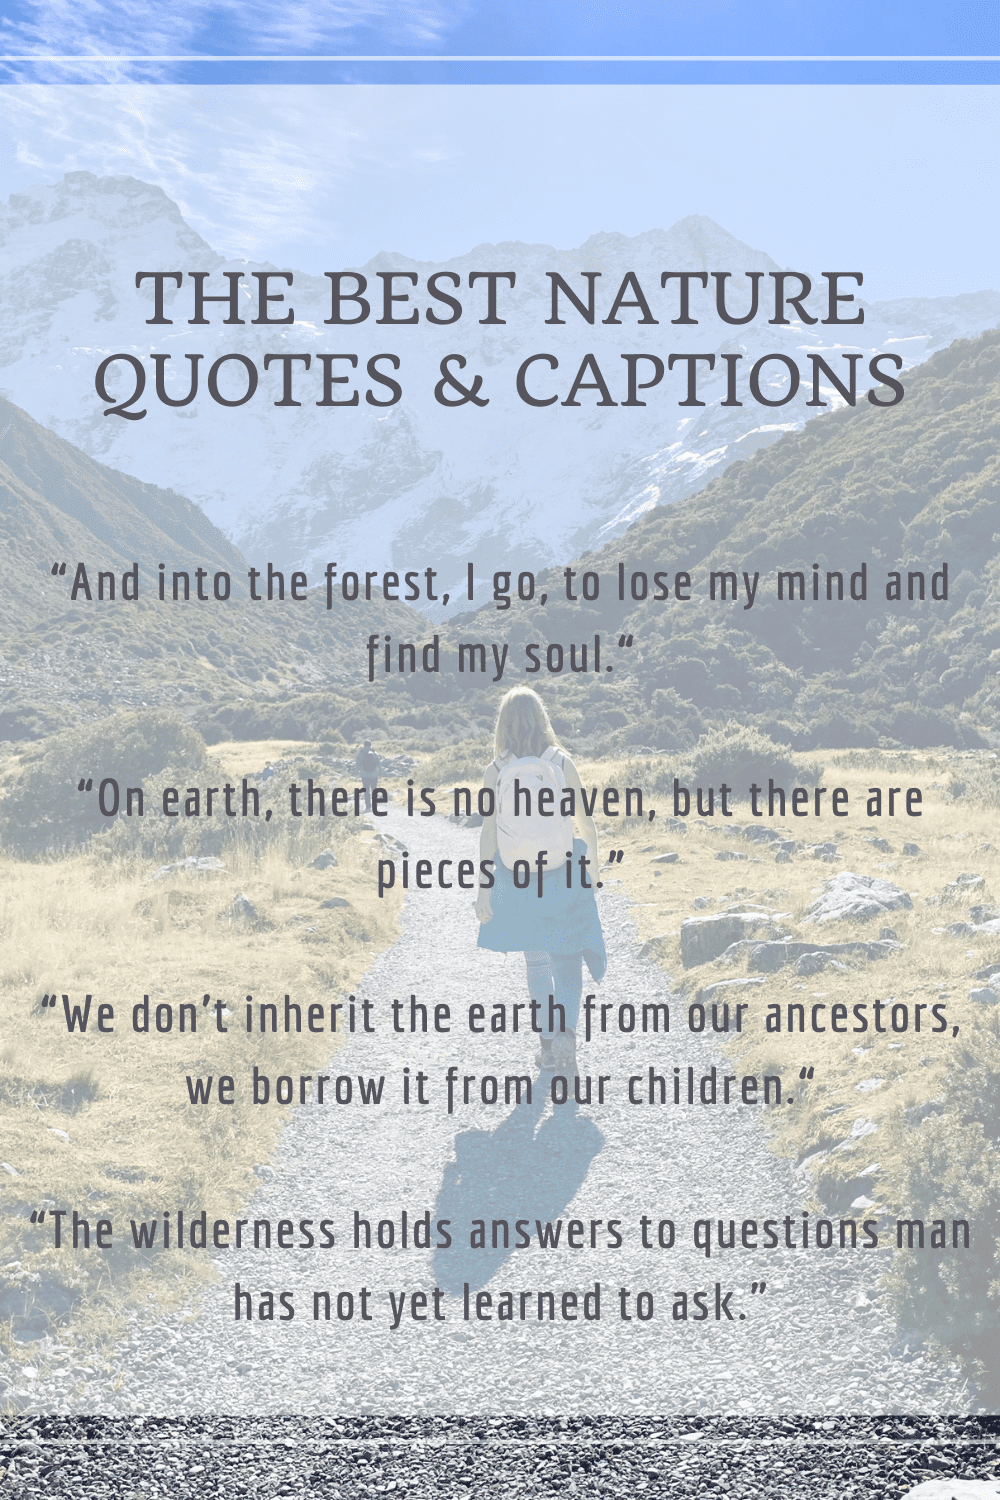 The Best Nature Quotes & Captions